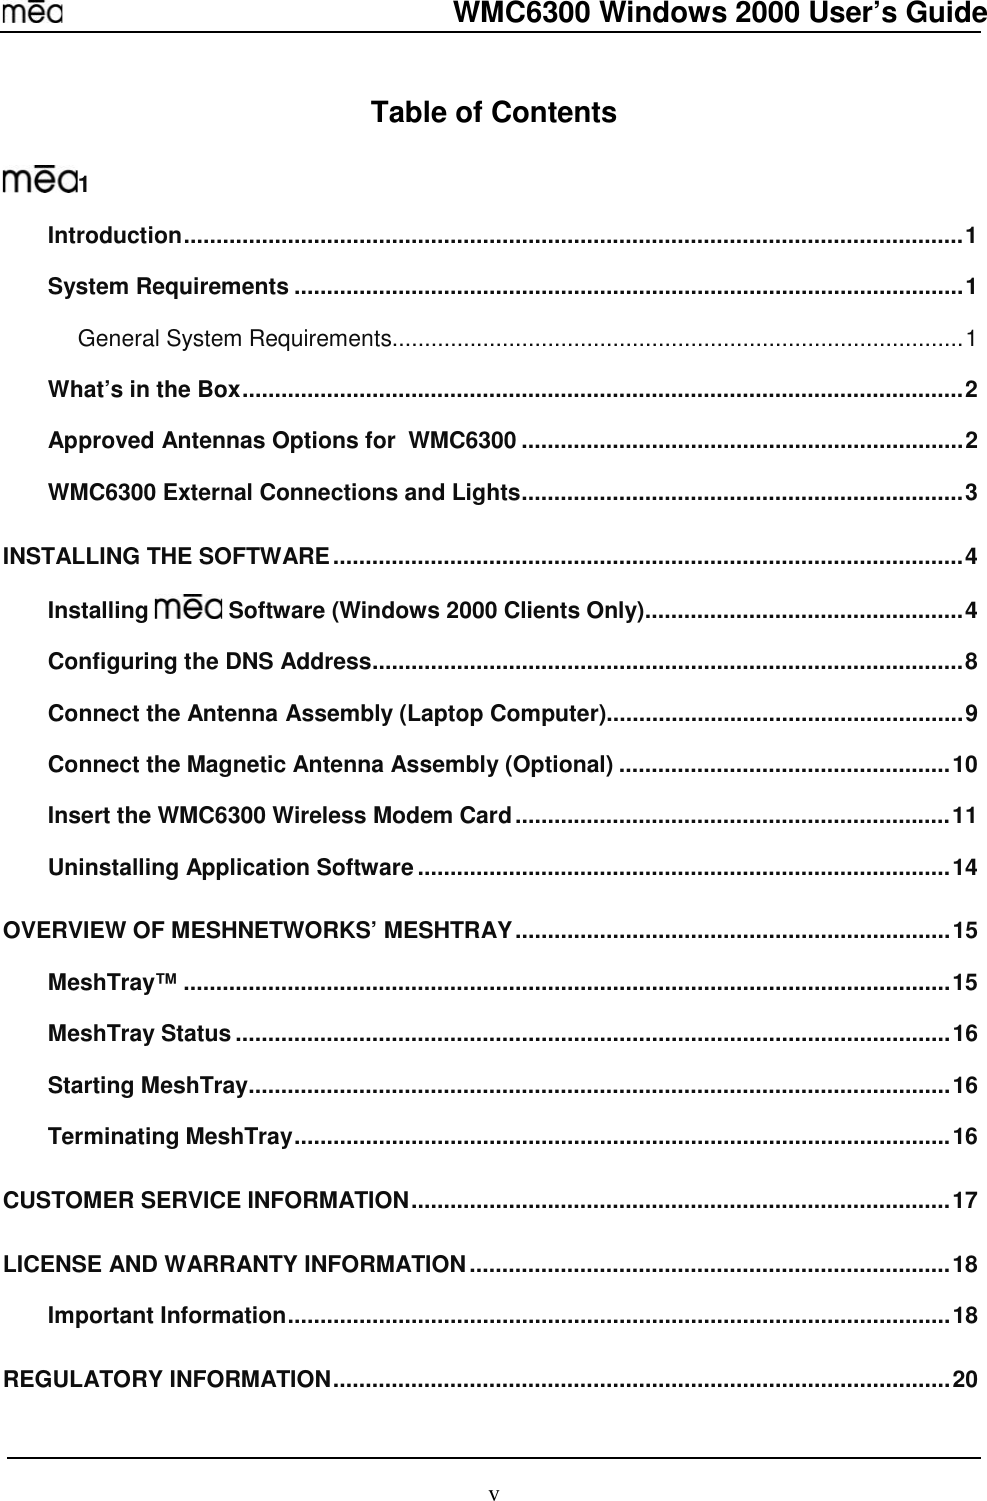   WMC6300 Windows 2000 User’s Guide v Table of Contents  1 Introduction........................................................................................................................1 System Requirements .......................................................................................................1 General System Requirements........................................................................................1 What’s in the Box...............................................................................................................2 Approved Antennas Options for  WMC6300 ....................................................................2 WMC6300 External Connections and Lights....................................................................3 INSTALLING THE SOFTWARE.................................................................................................4 Installing   Software (Windows 2000 Clients Only).................................................4 Configuring the DNS Address...........................................................................................8 Connect the Antenna Assembly (Laptop Computer).......................................................9 Connect the Magnetic Antenna Assembly (Optional) ...................................................10 Insert the WMC6300 Wireless Modem Card...................................................................11 Uninstalling Application Software..................................................................................14 OVERVIEW OF MESHNETWORKS’ MESHTRAY...................................................................15 MeshTray™ ......................................................................................................................15 MeshTray Status..............................................................................................................16 Starting MeshTray............................................................................................................16 Terminating MeshTray.....................................................................................................16 CUSTOMER SERVICE INFORMATION...................................................................................17 LICENSE AND WARRANTY INFORMATION..........................................................................18 Important Information......................................................................................................18 REGULATORY INFORMATION...............................................................................................20 